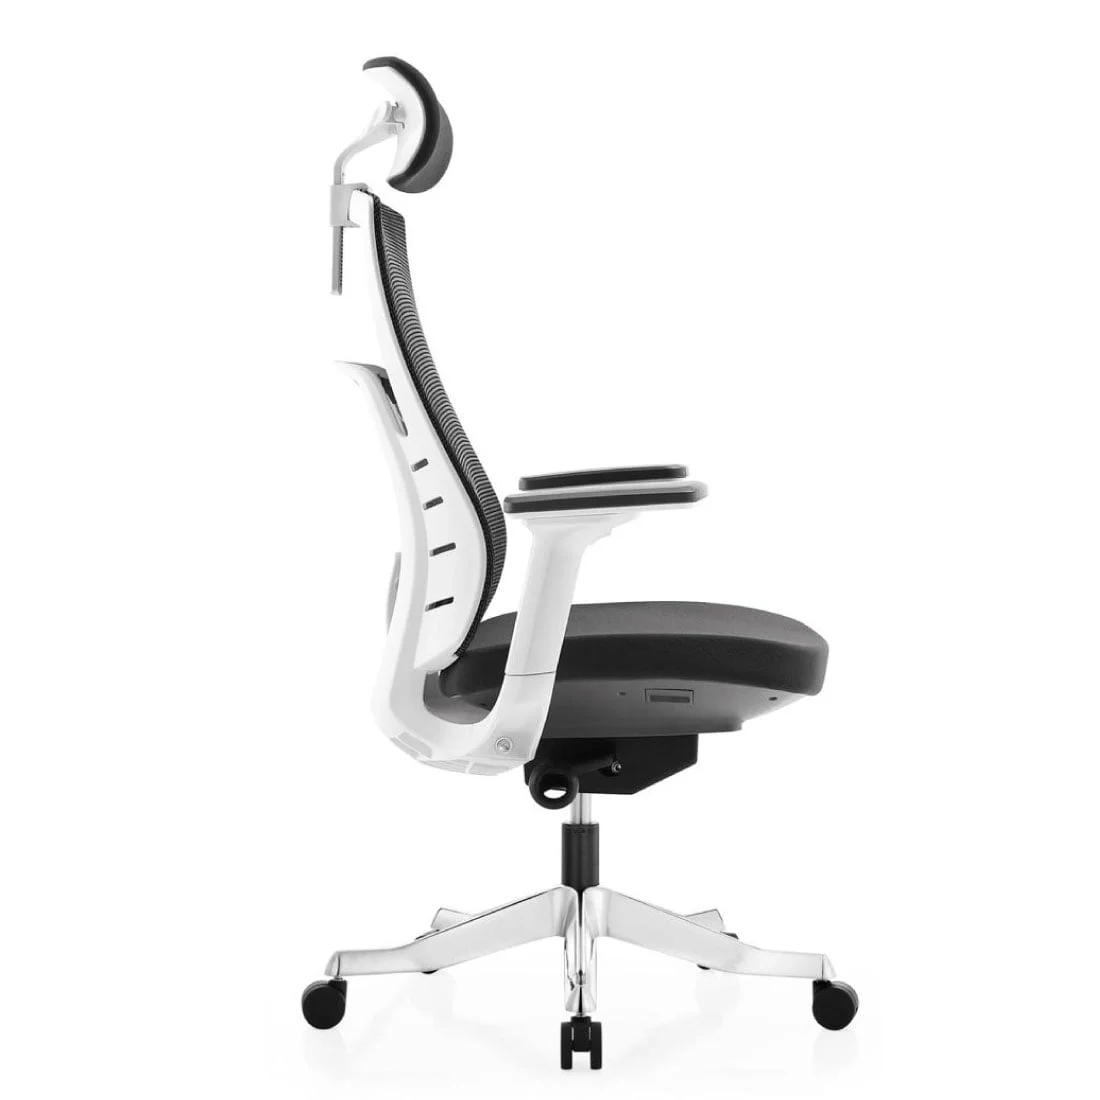 Inspire chair with headrest at Ample Seatings